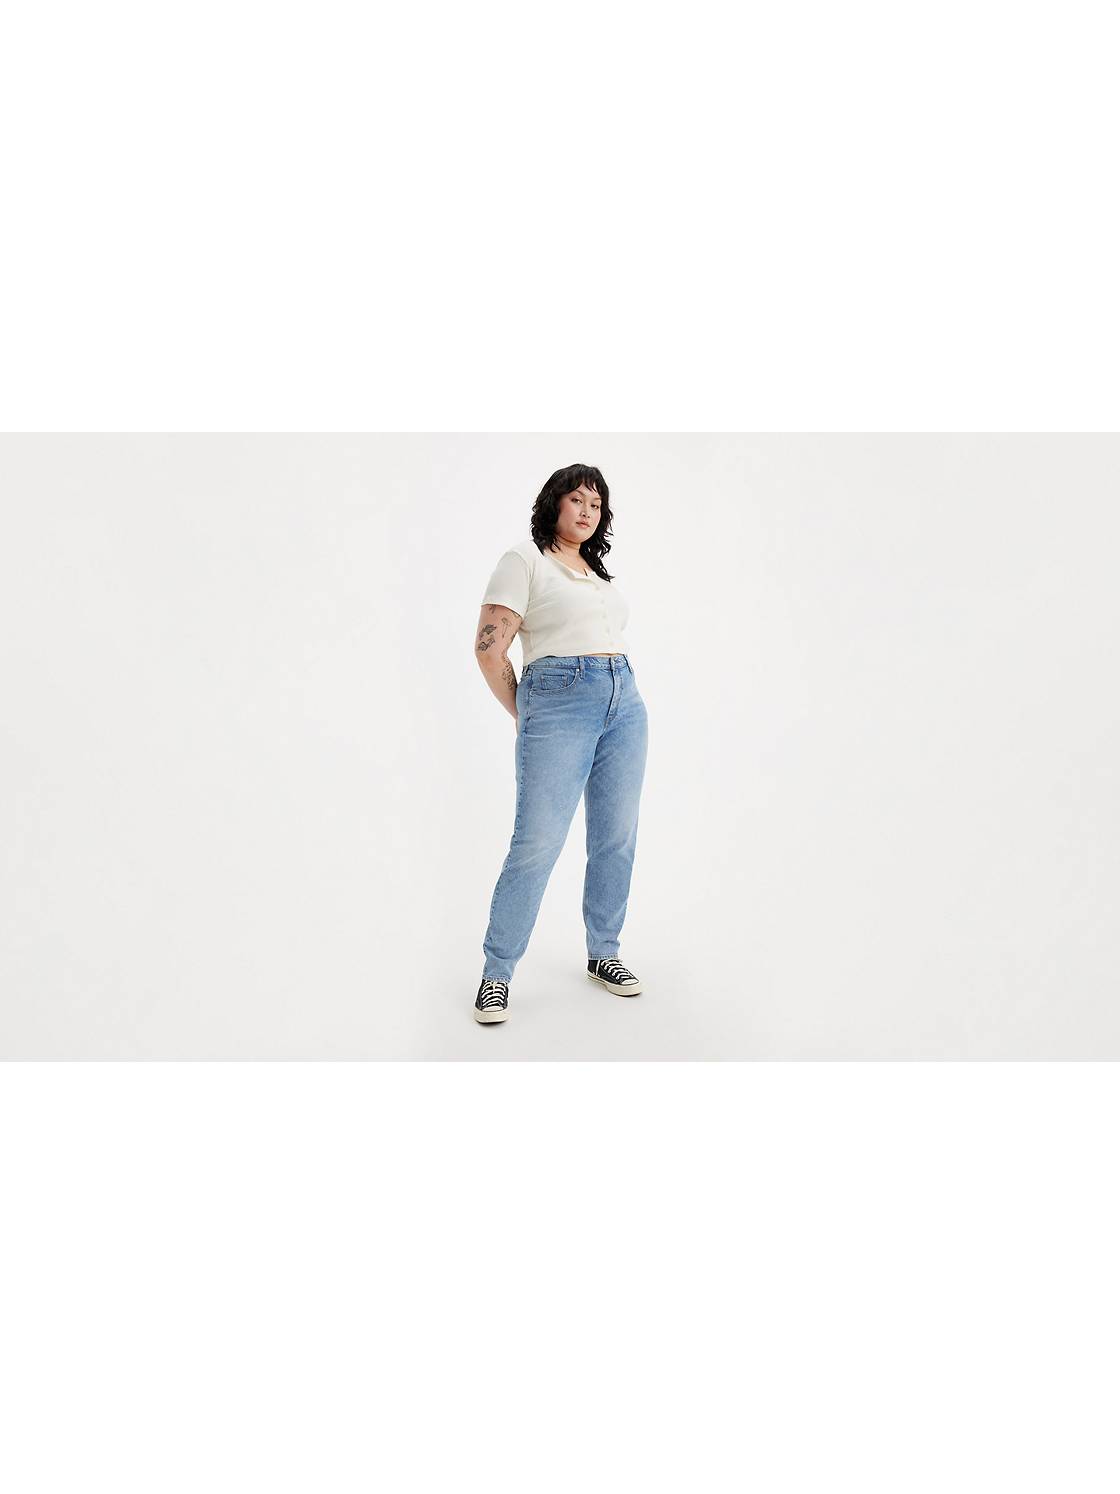 High-Waisted Jeans - Women's High-Rise Jeans & Pants